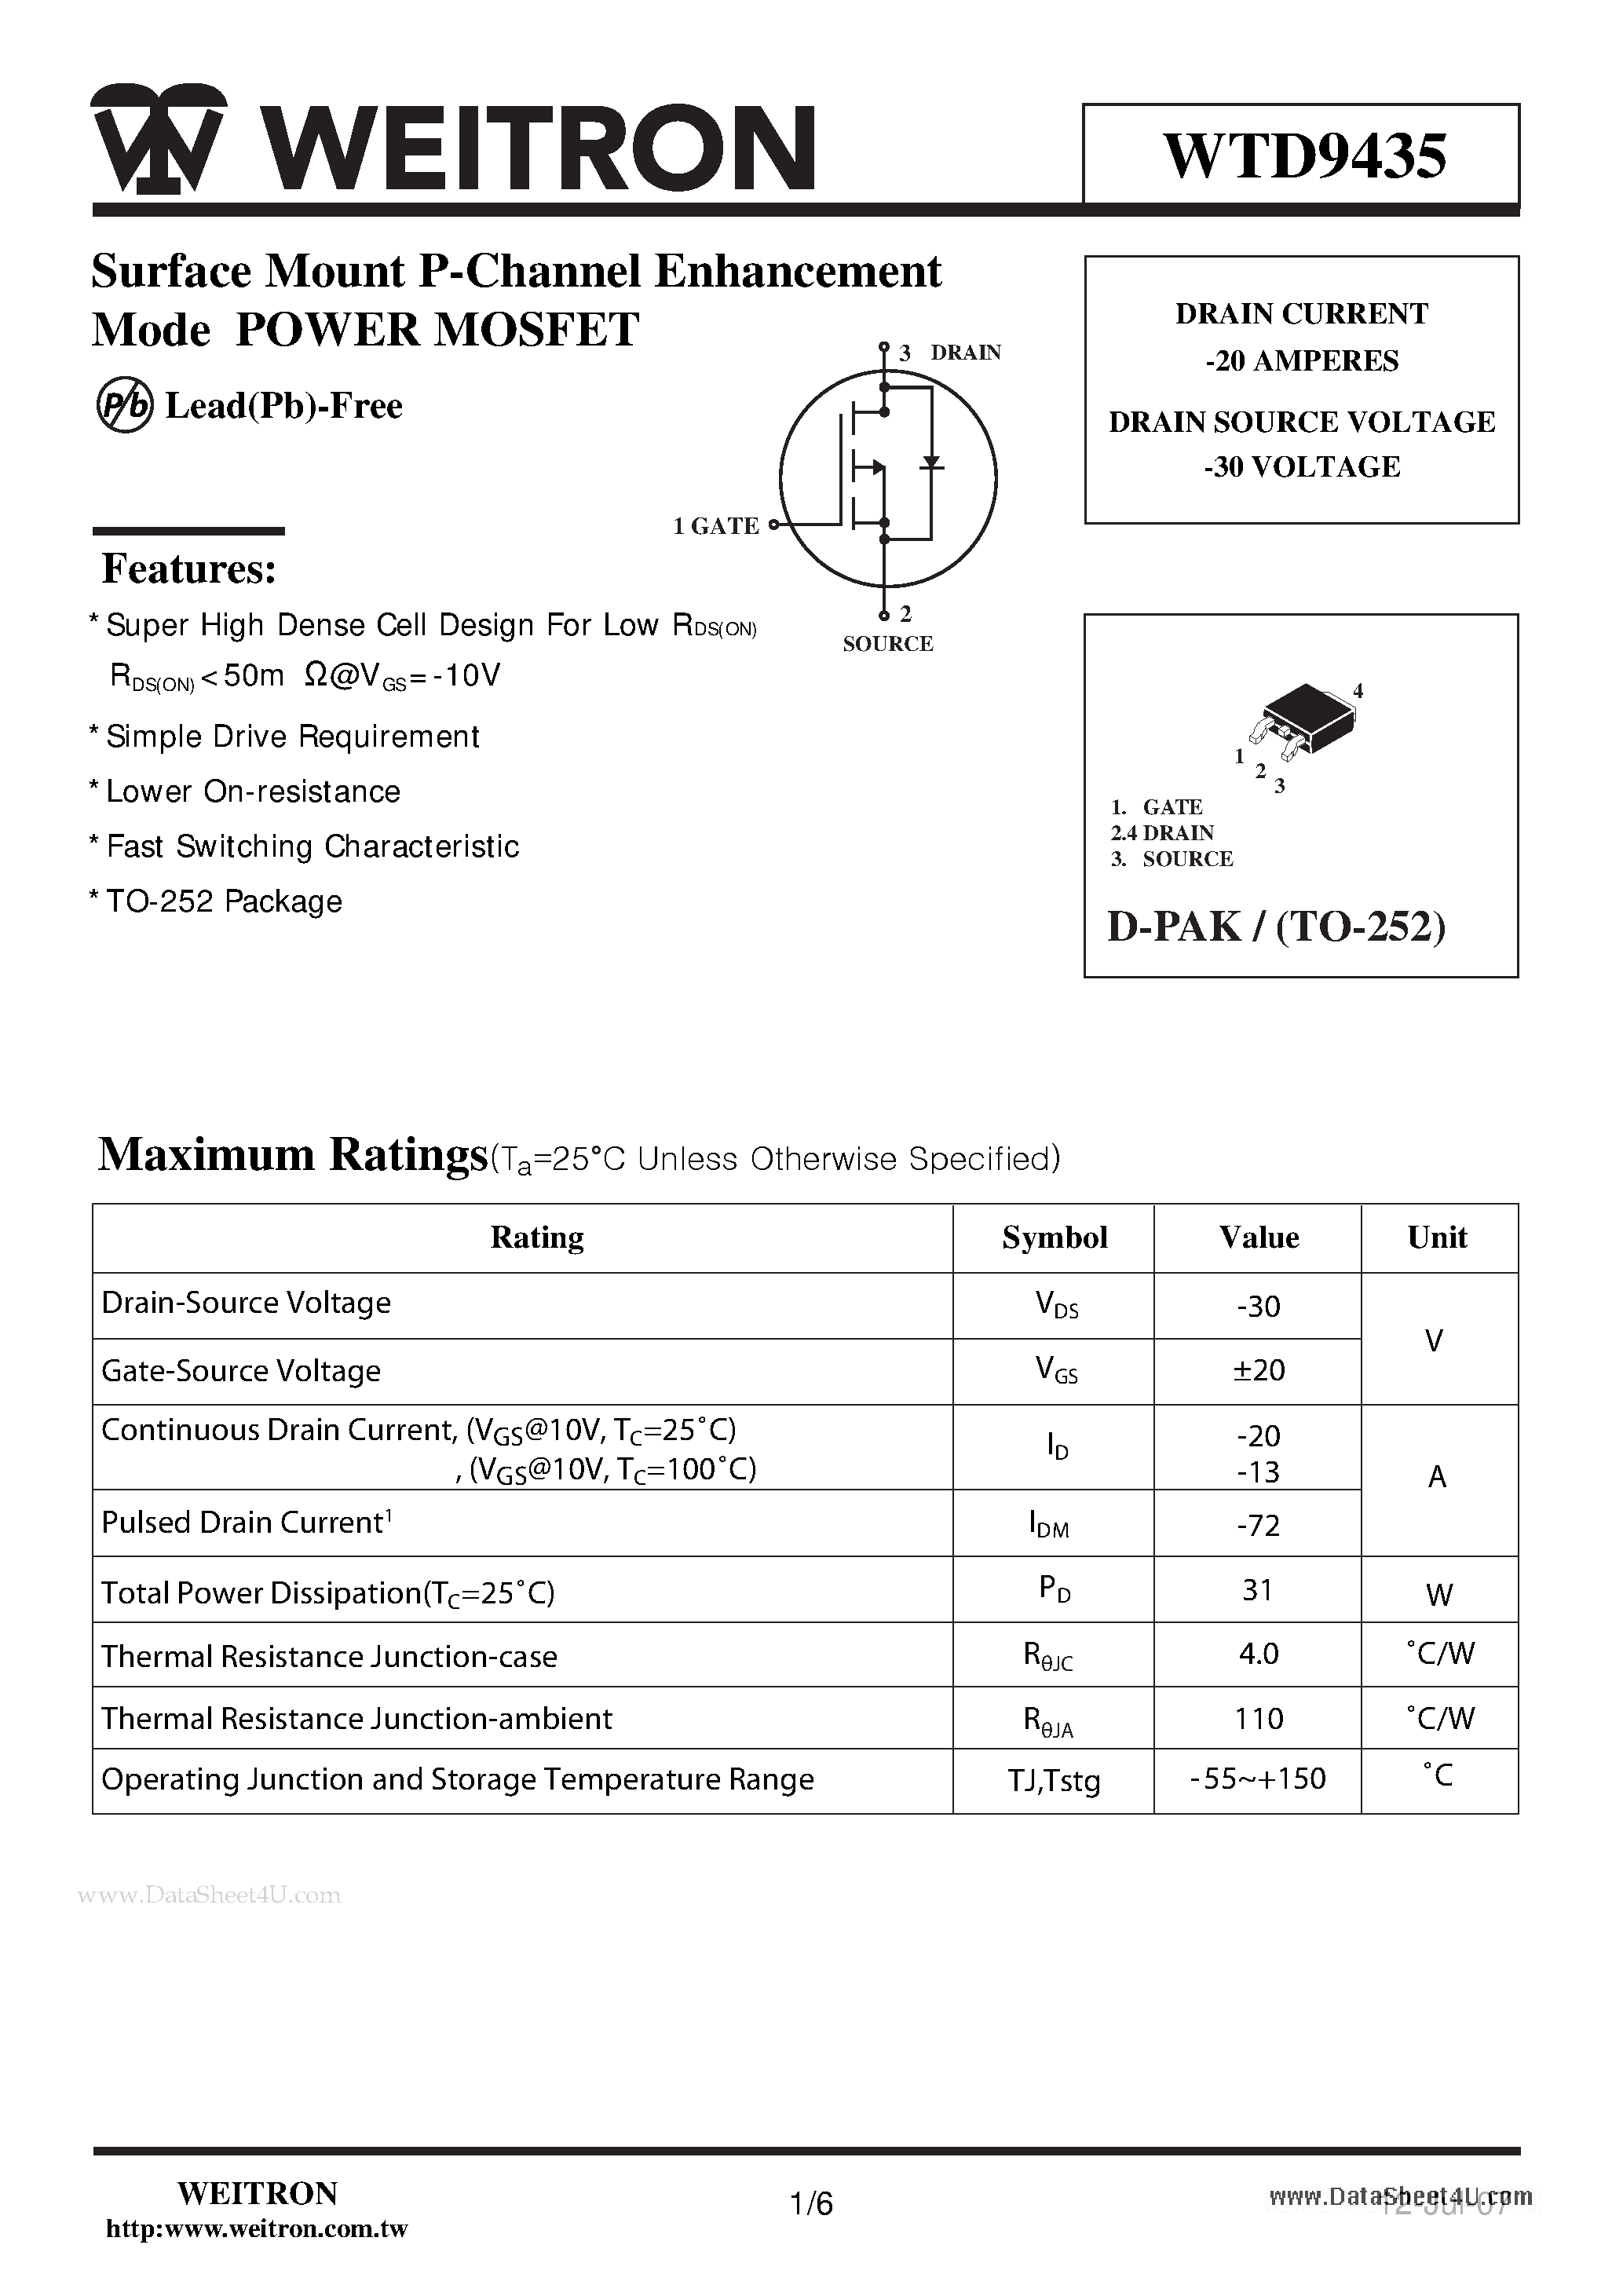 Даташит WTD9435 - Surface Mount P-Channel Enhancement Mode POWER MOSFET страница 1